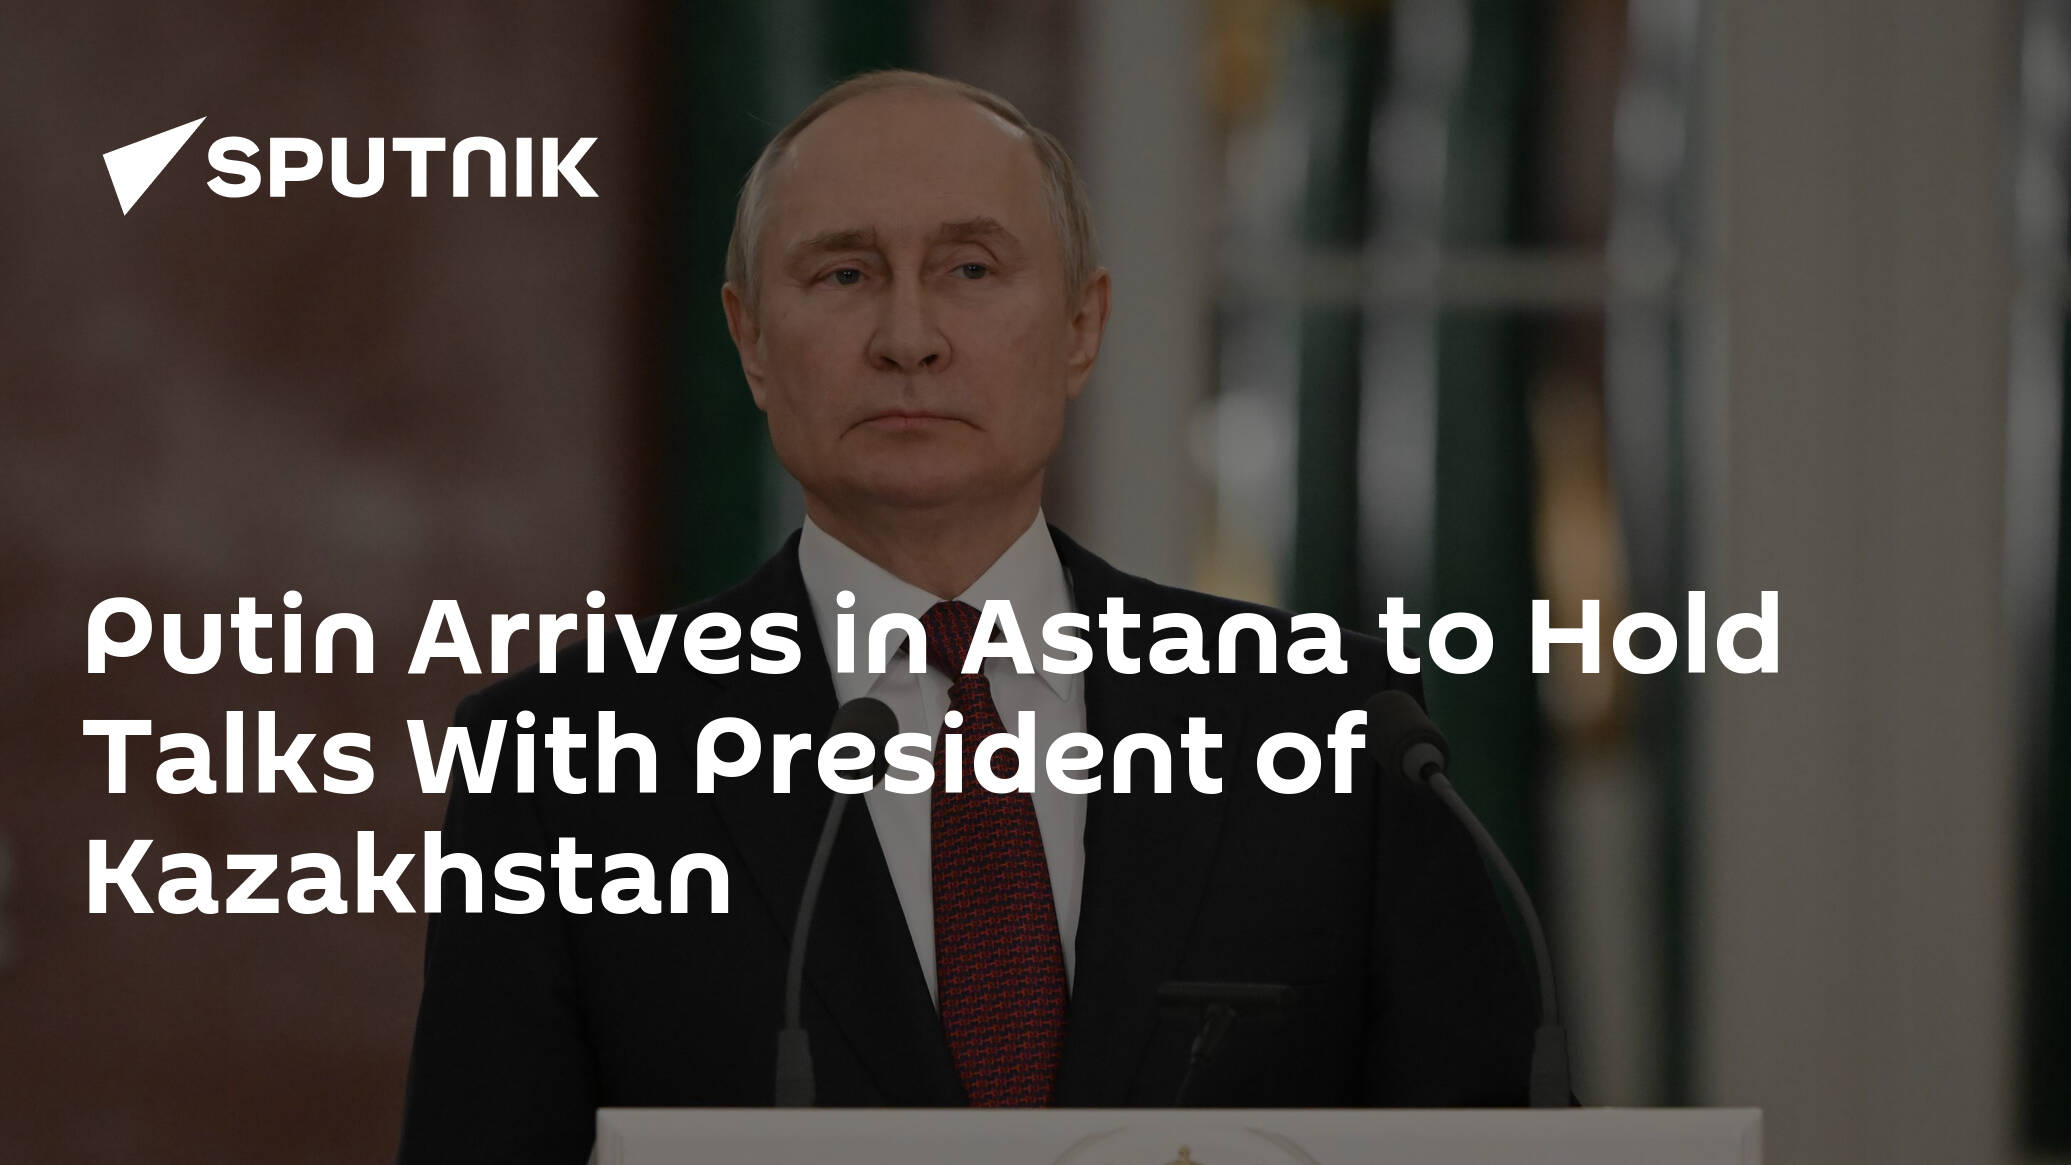 Putin Arrives in Astana to Hold Talks With President of Kazakhstan